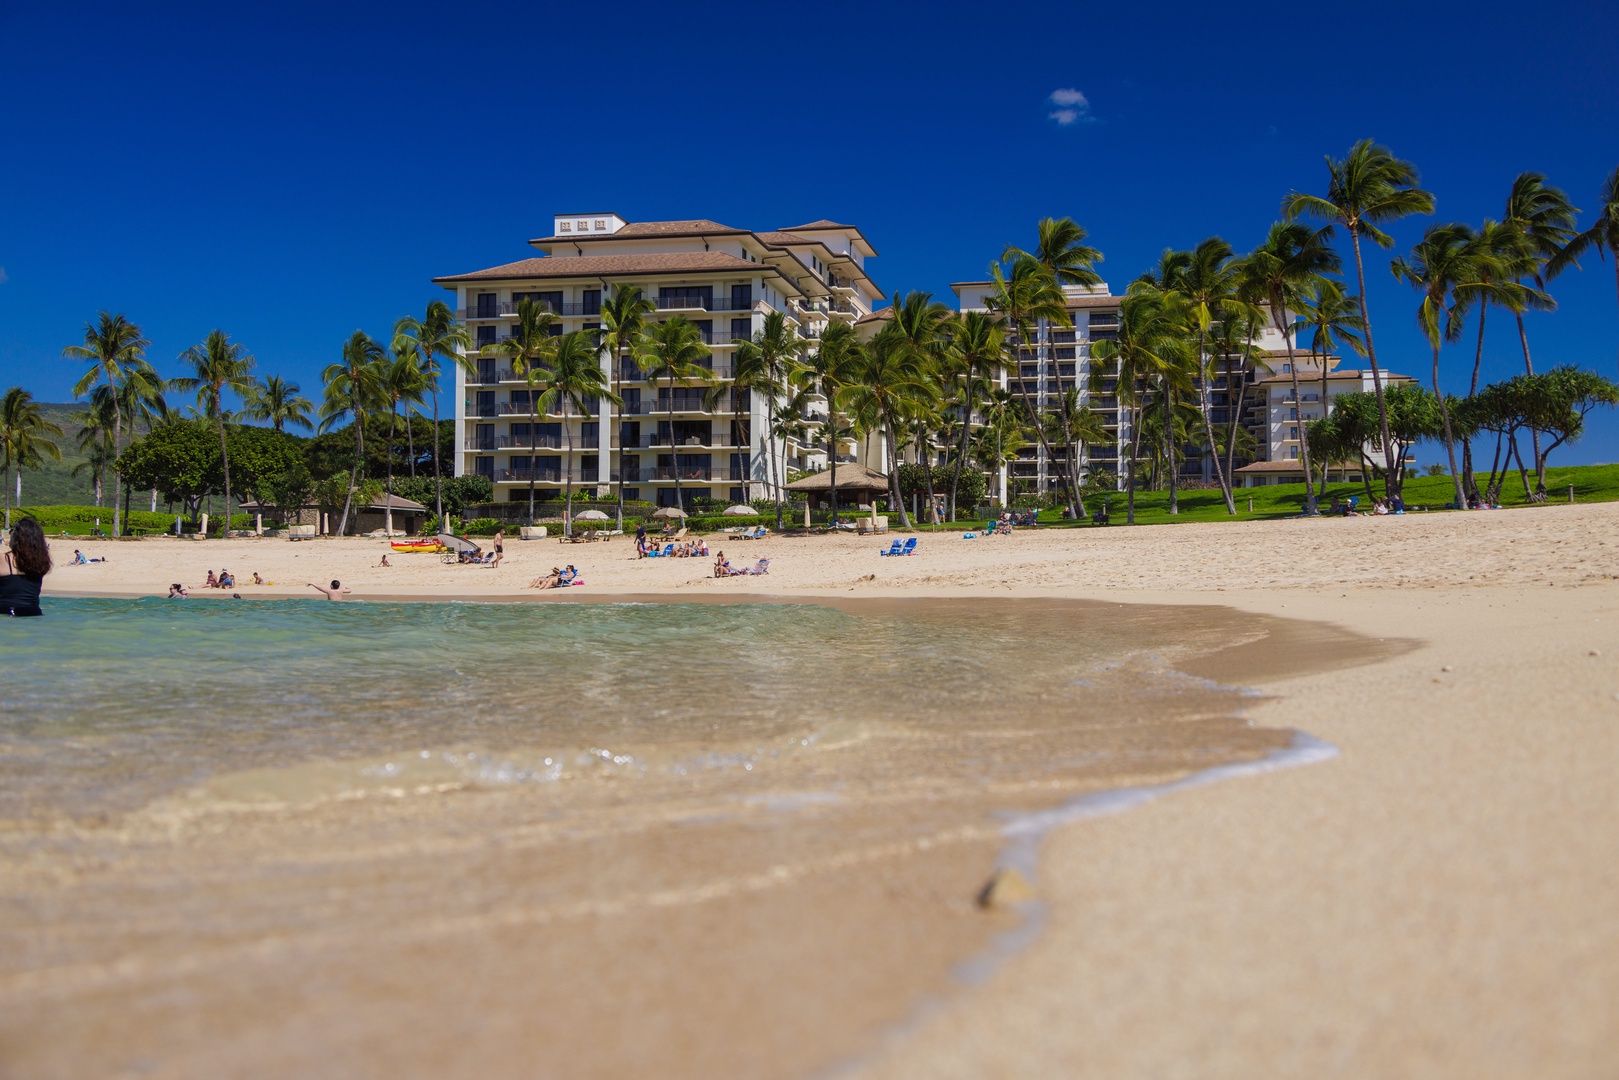 Kapolei Vacation Rentals, Ko Olina Kai 1033C - The private lagoon at Ko Olina is the perfect place for a relaxing afternoon in the sun.